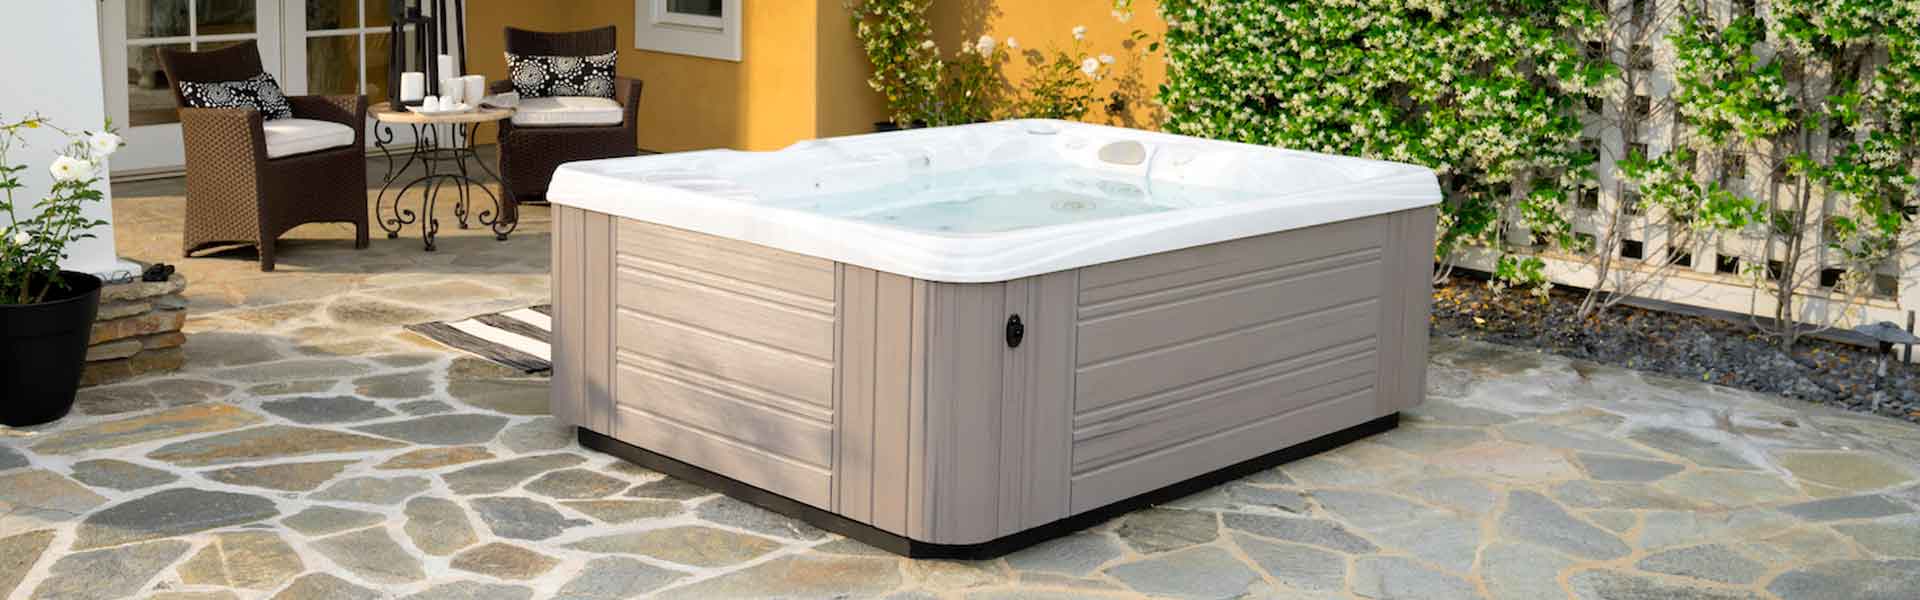 10 of the Most Reliable Hot Tubs